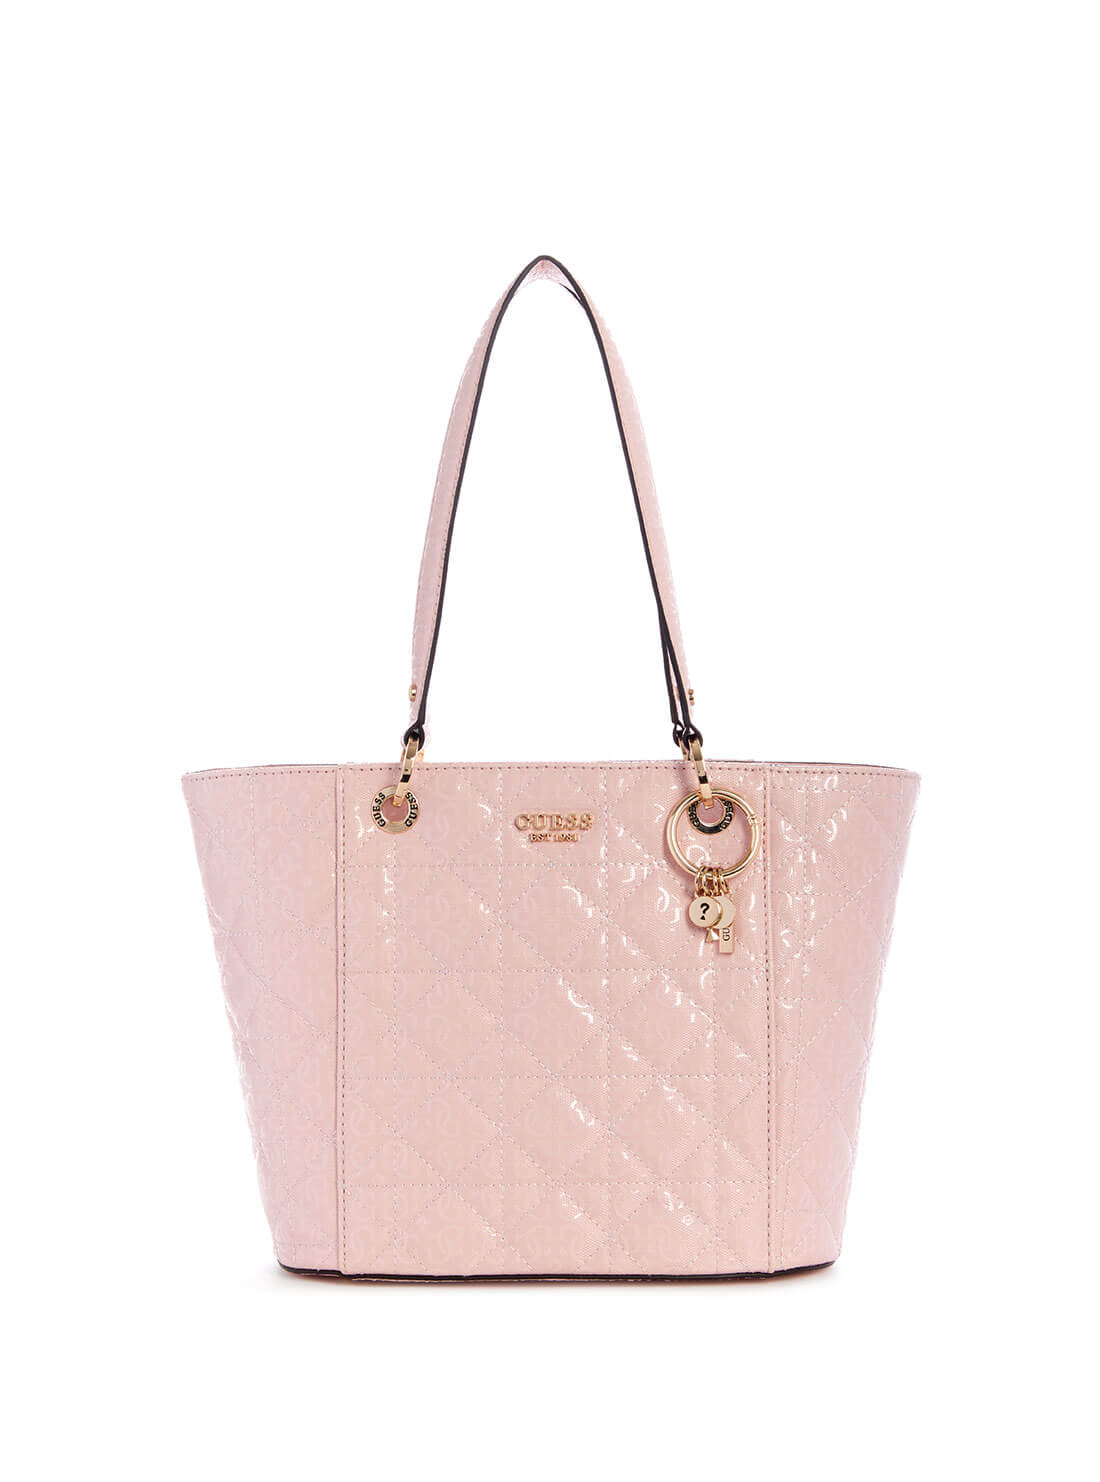 GUESS Womens Pink Noelle Elite Tote Bag GS787922 Front View